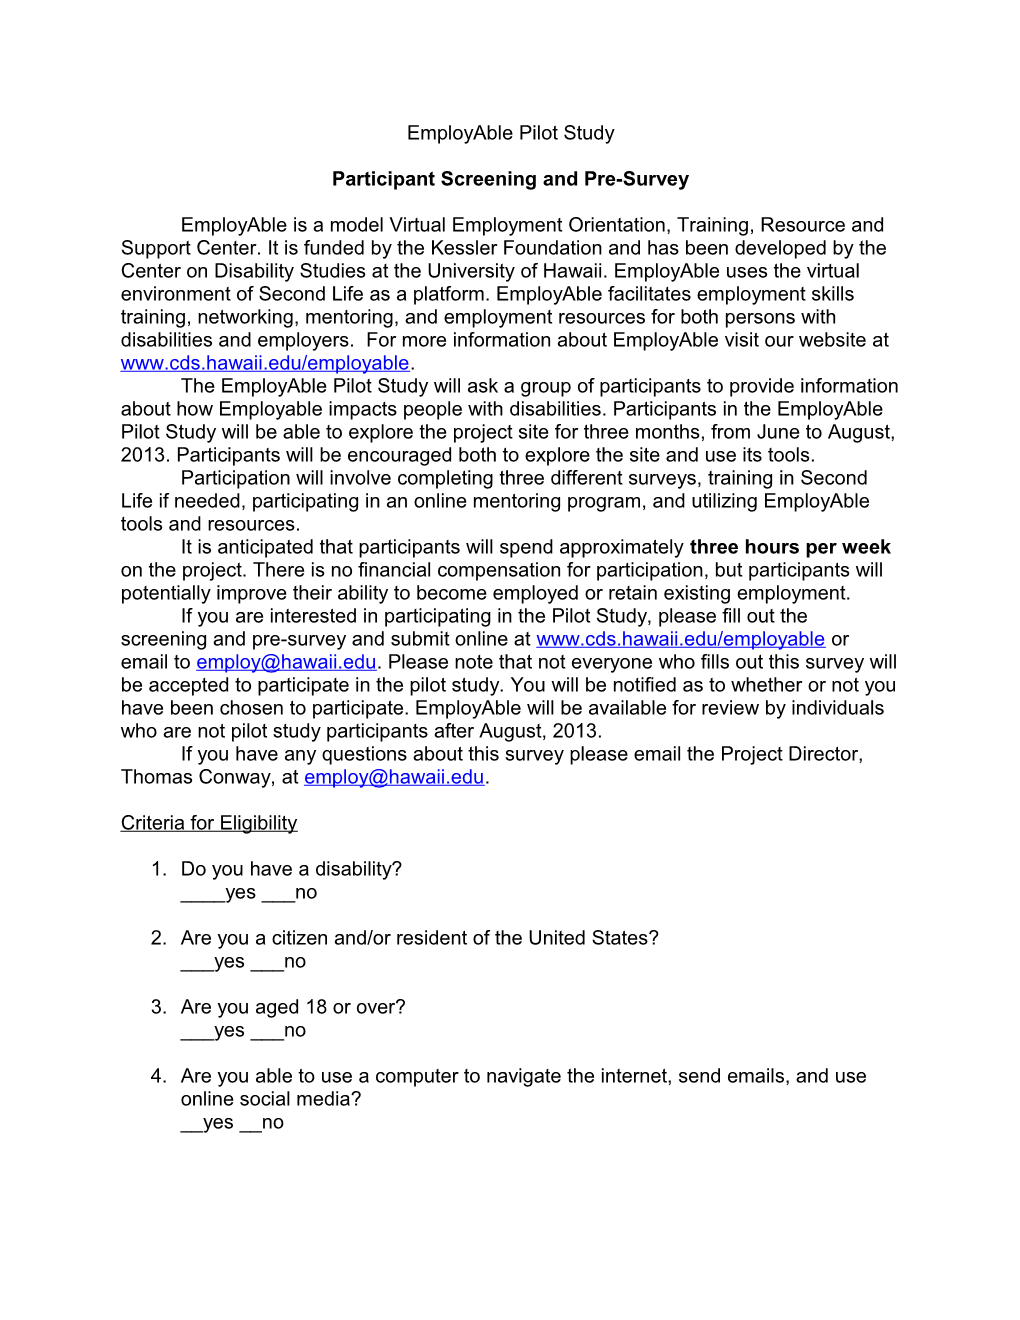 Participant Screening and Pre-Survey